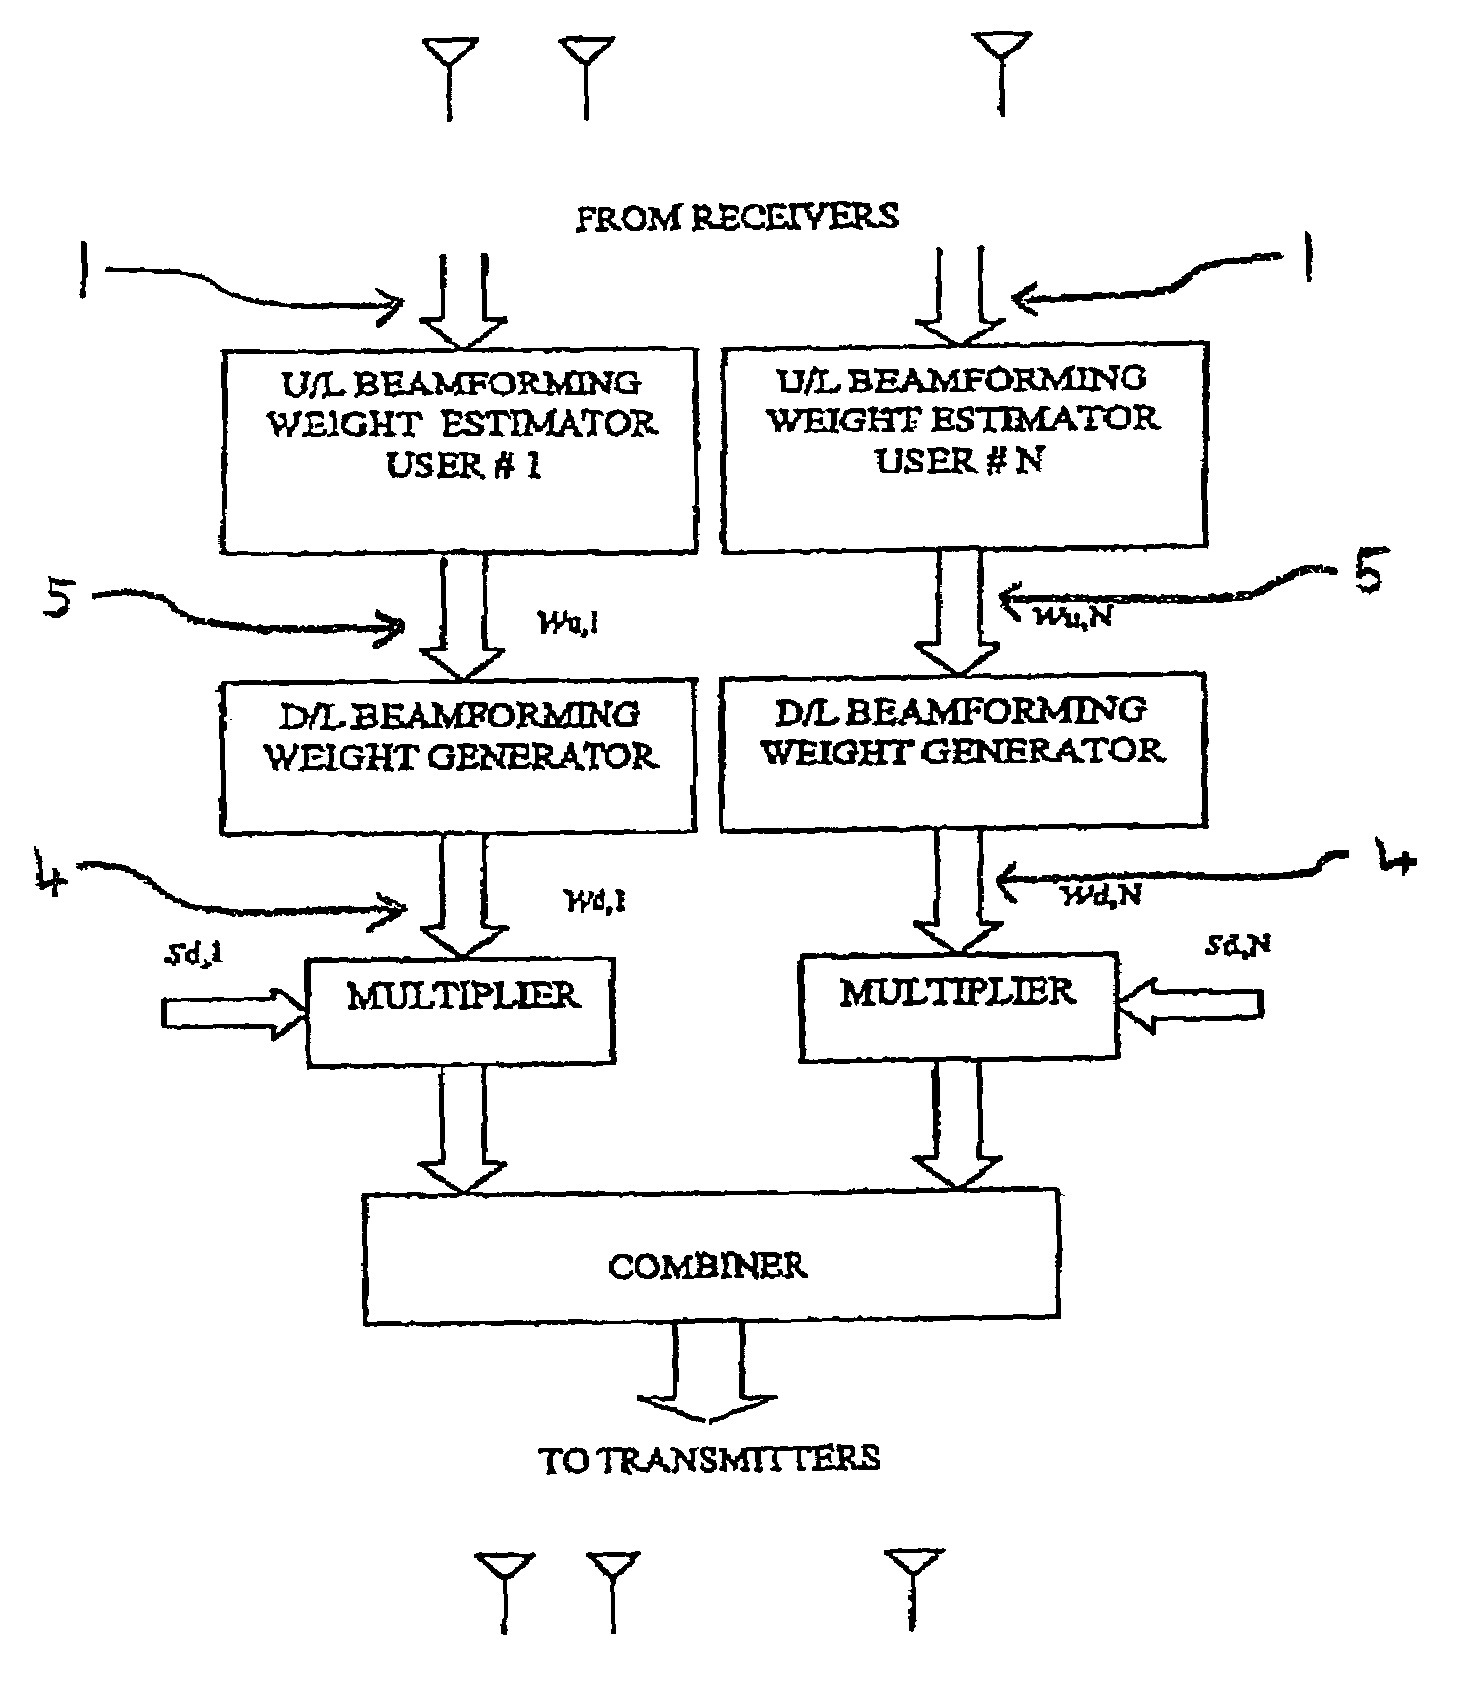 Beam synthesis method for downlink beamforming in FDD wireless communication system